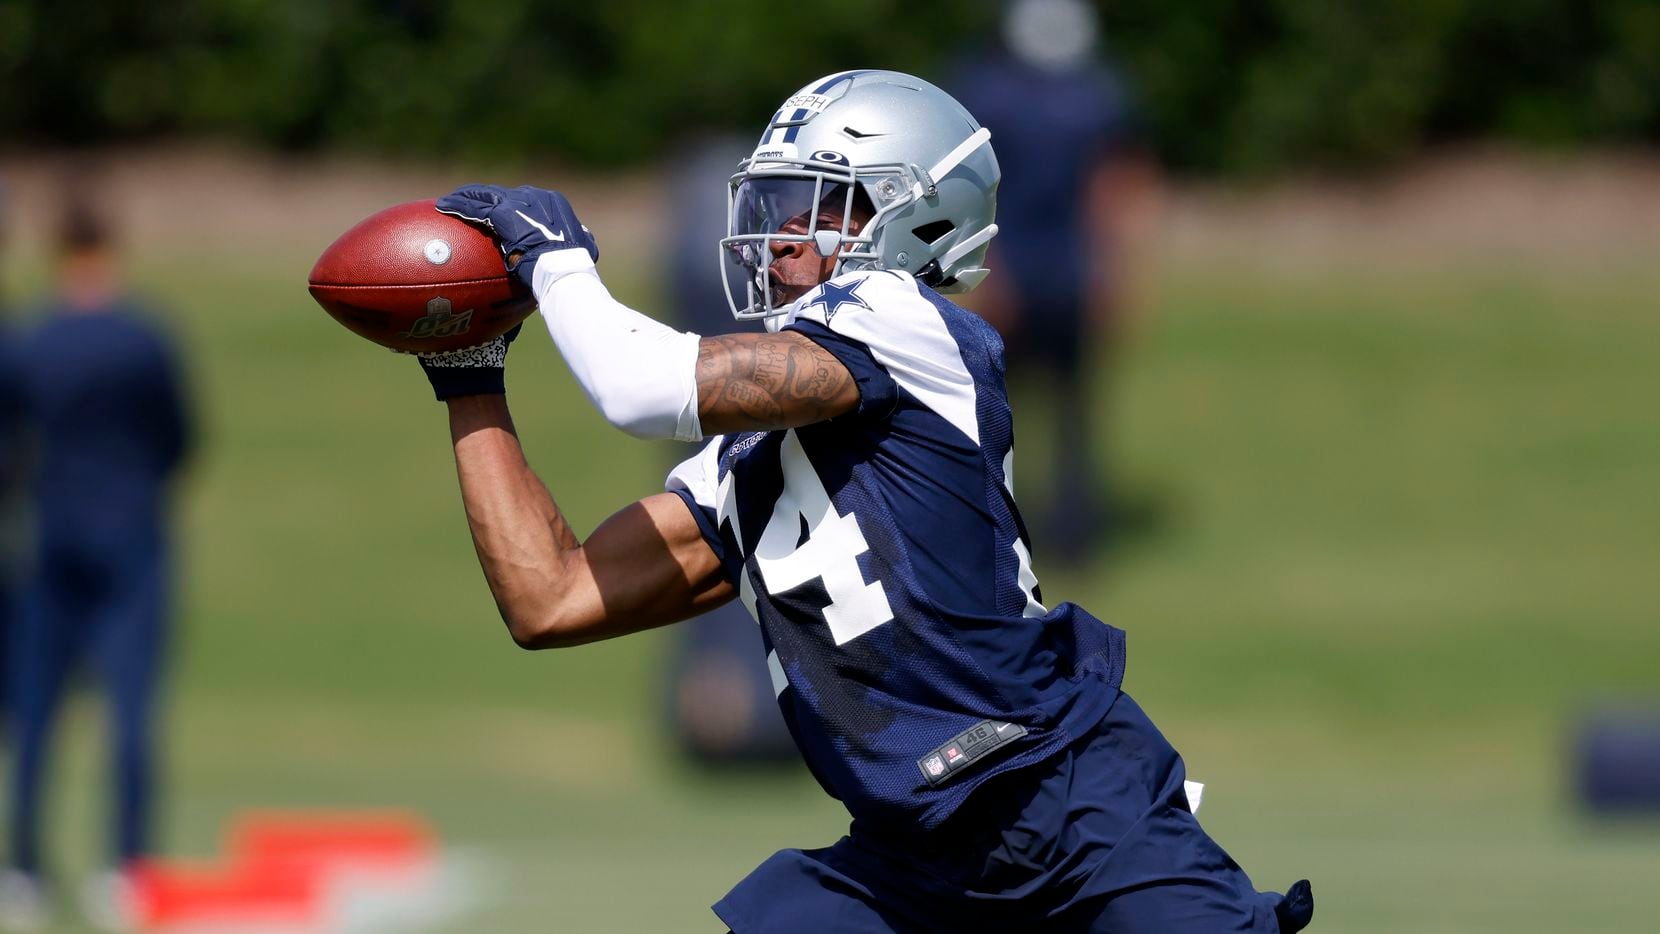 Dallas Cowboys rookie cornerback Kelvin Joseph (24) caches a pass during a defensive drill at rookie minicamp at the The Star in Frisco, Texas, Saturday, May 15, 2021.